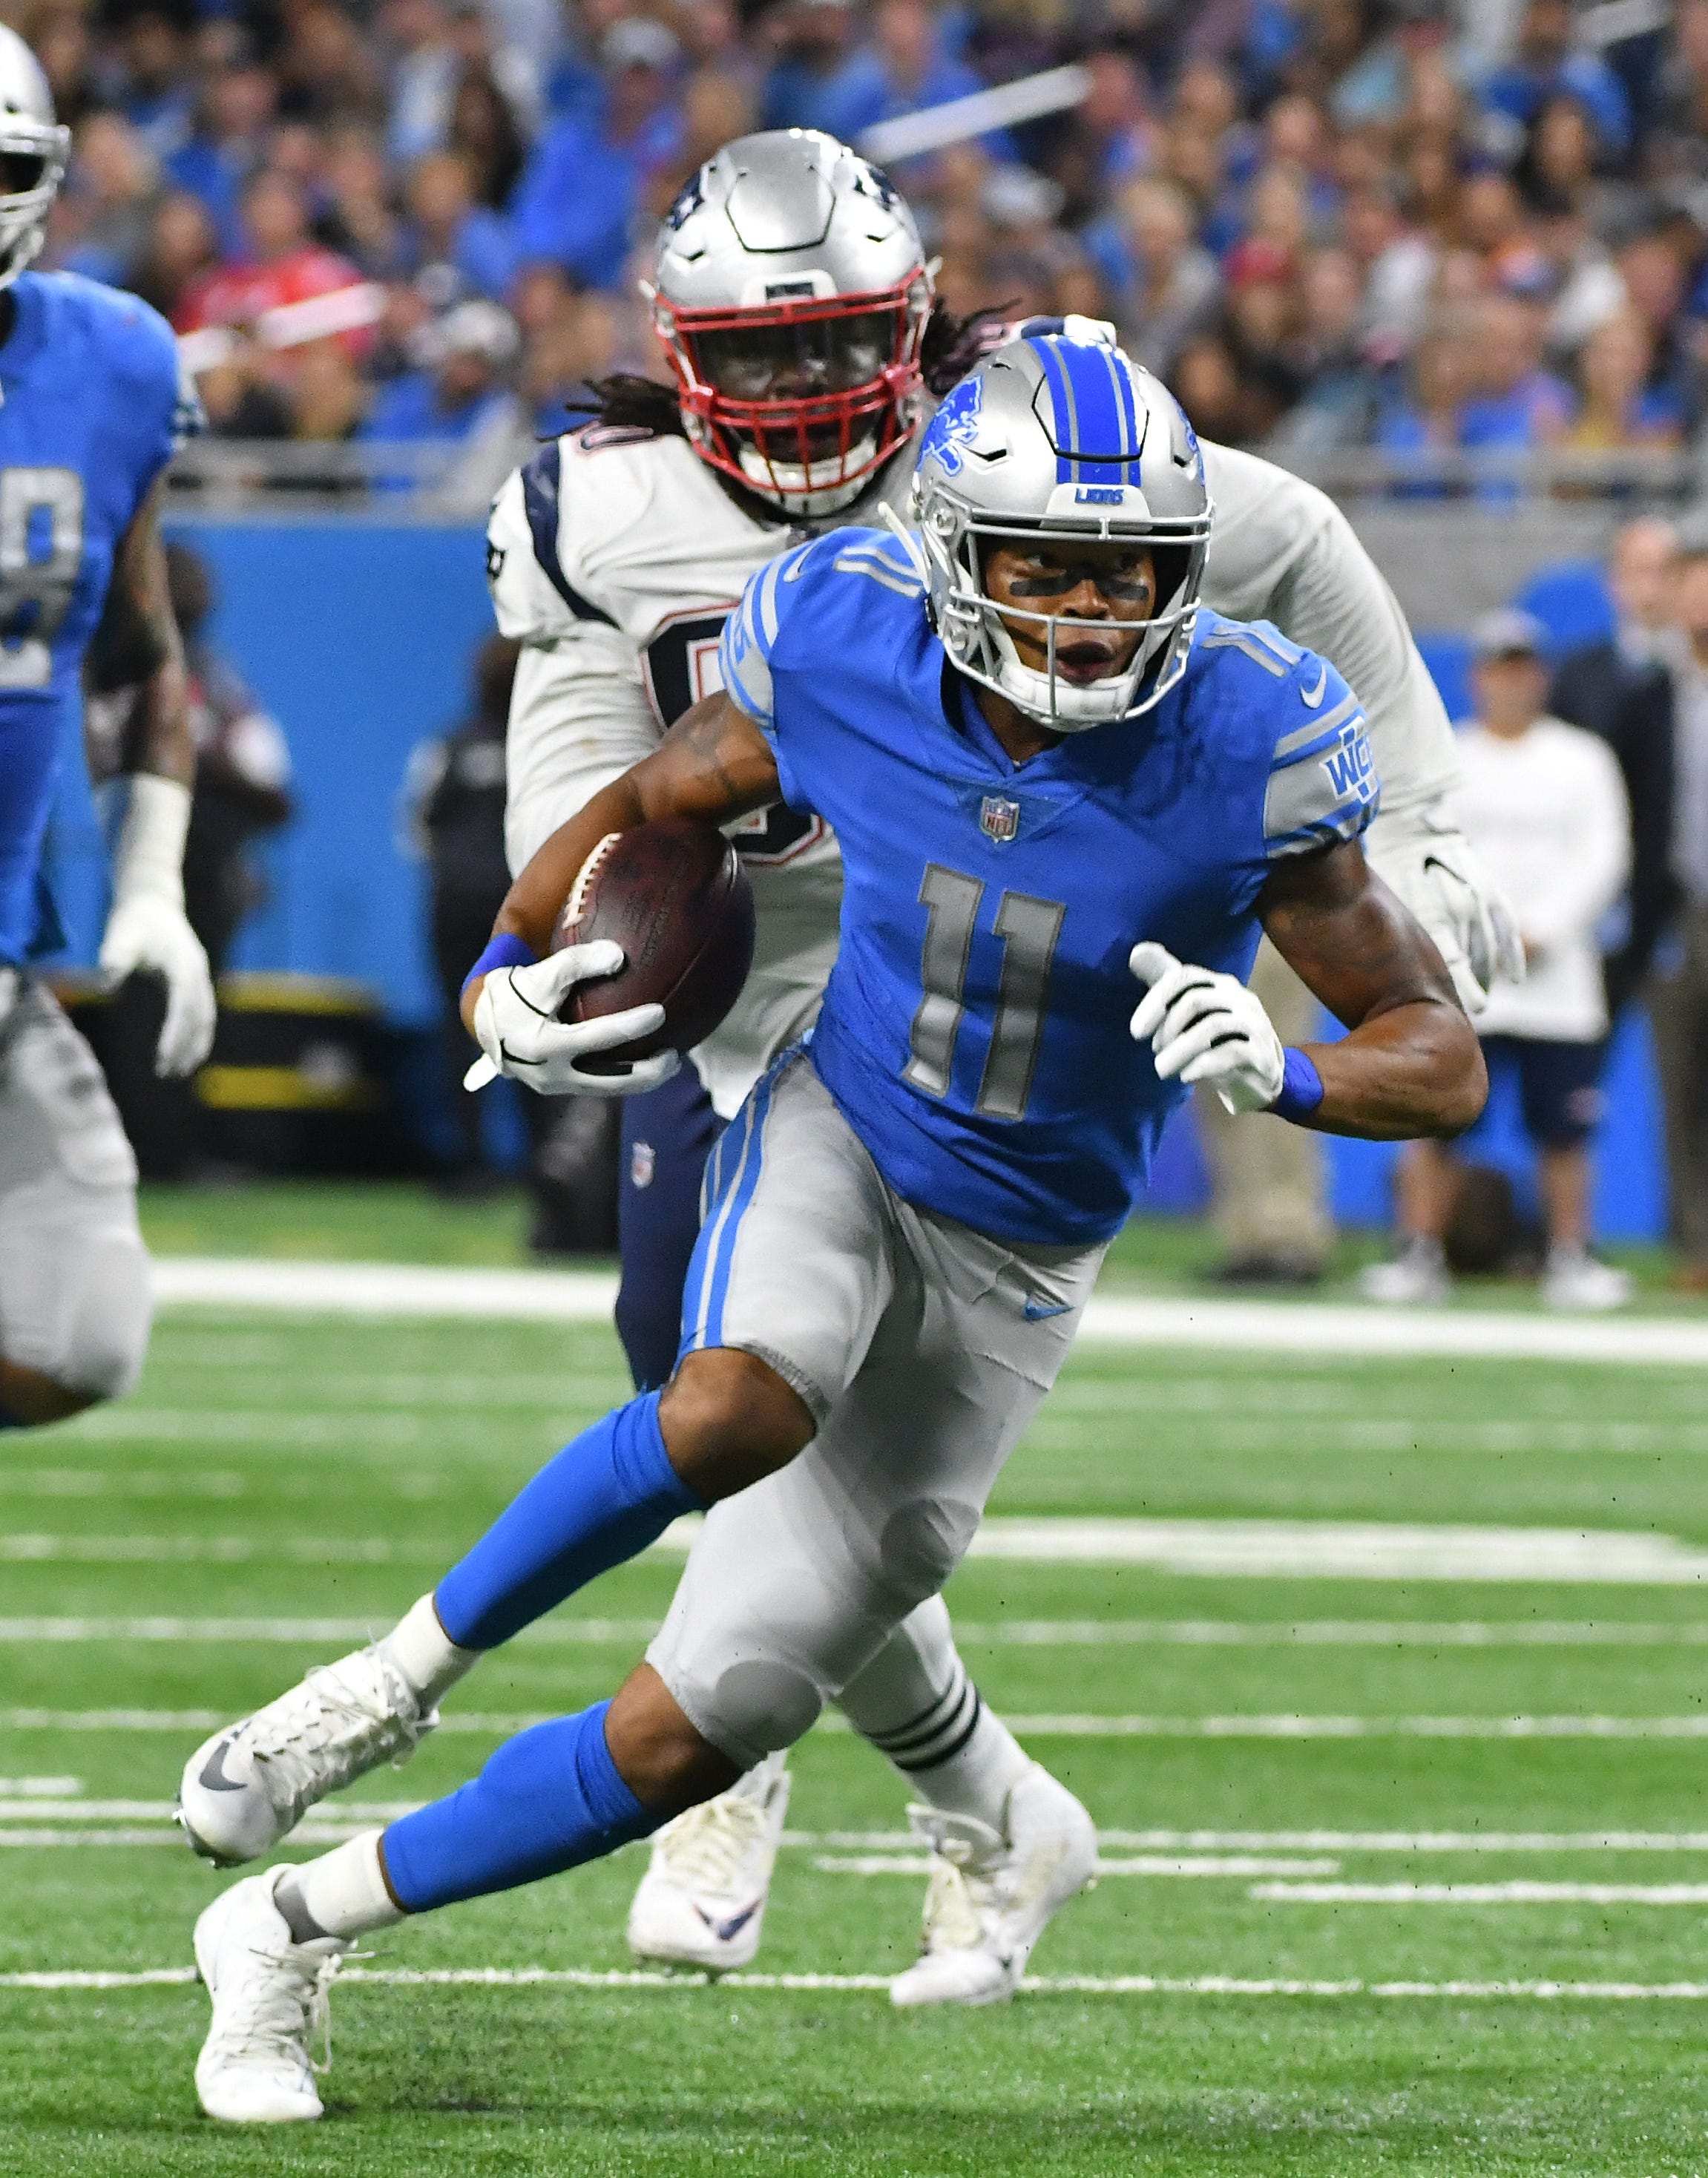 Lions ' Marvin Jones Jr. breaks up field after a reception in the first quarter.